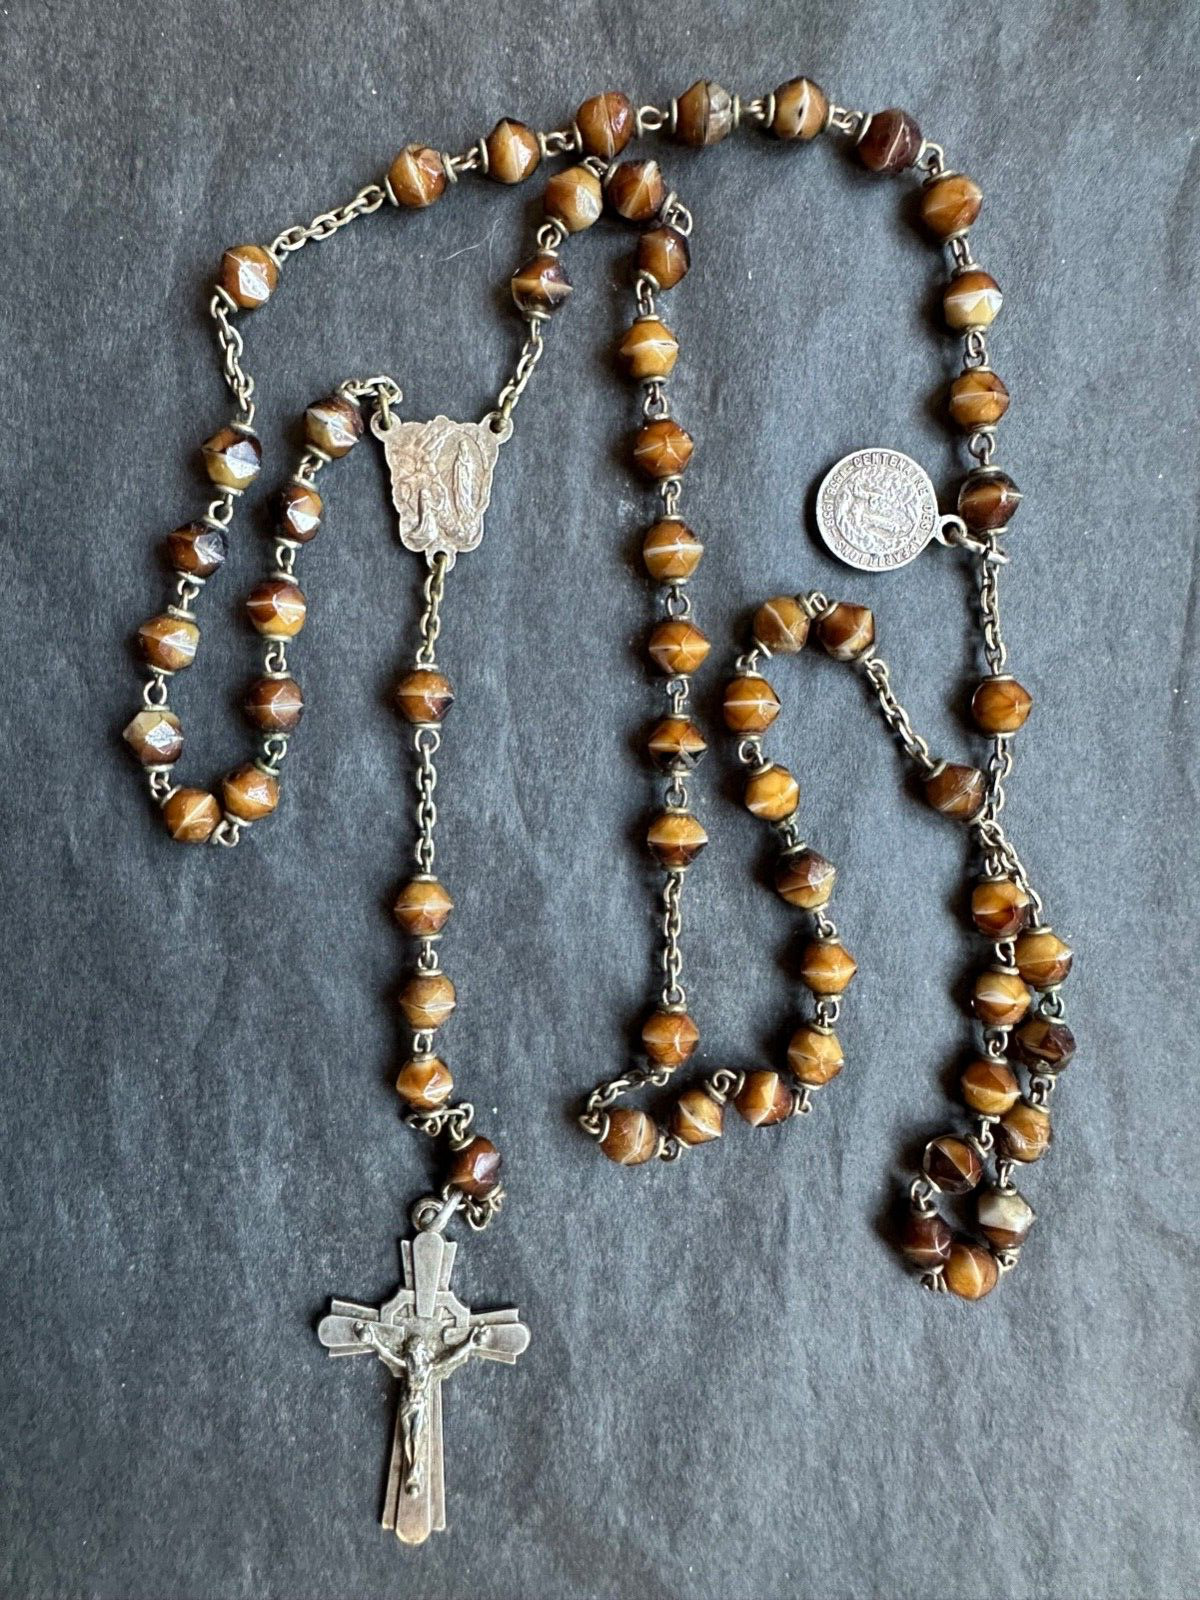 Superb French Antique Rosary -Tiger eye Beads,Sterling Silver Cross from Lourdes